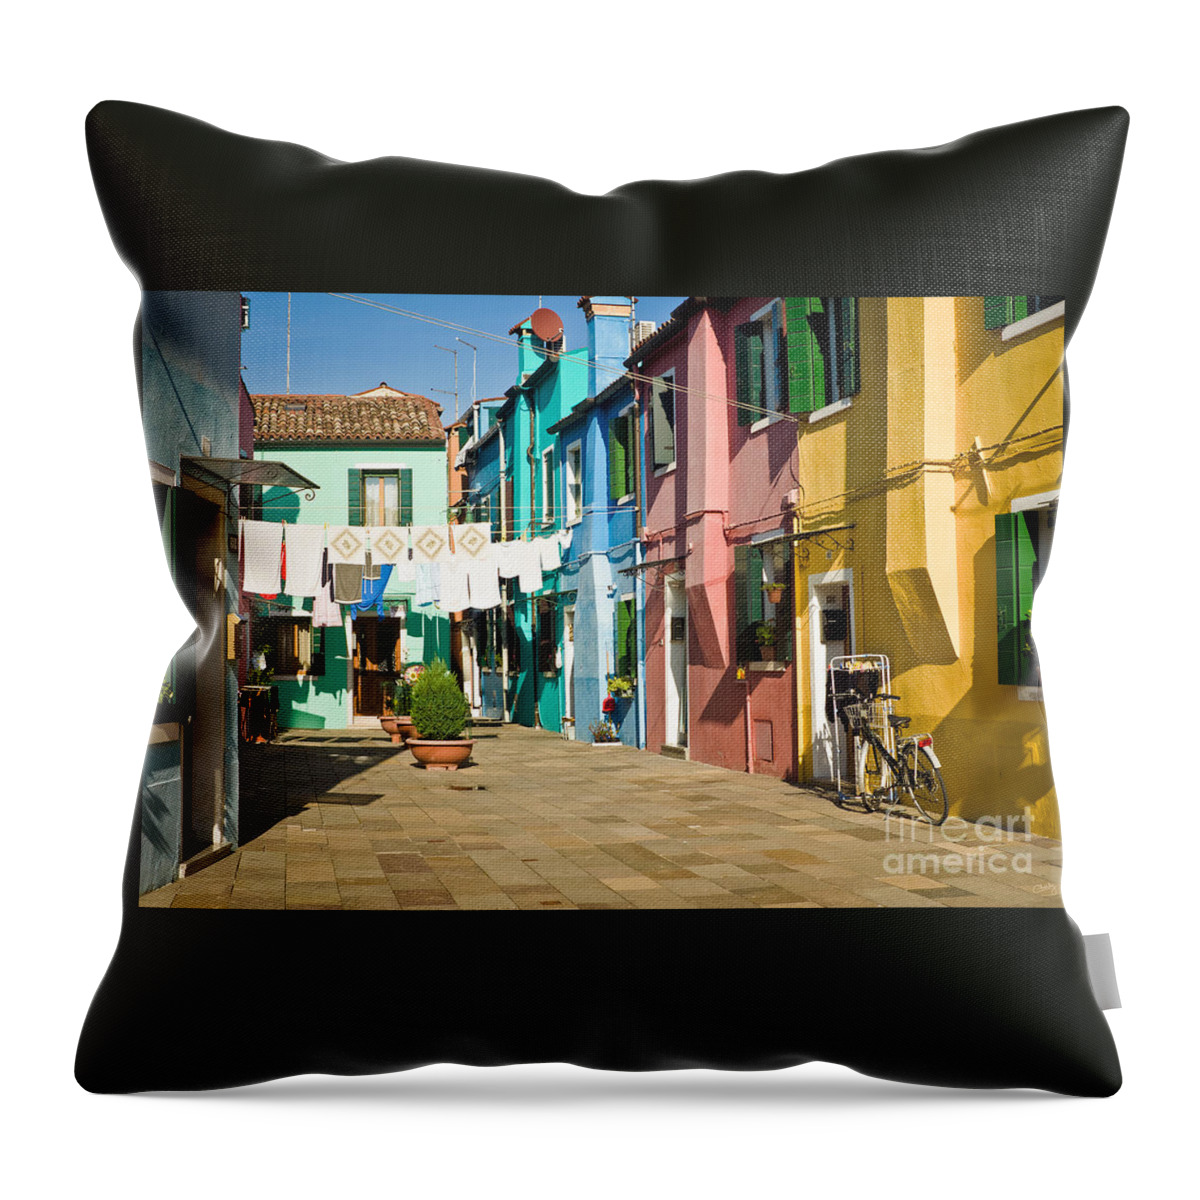 Colorful Piazza Throw Pillow featuring the photograph Colorful Piazza by Prints of Italy